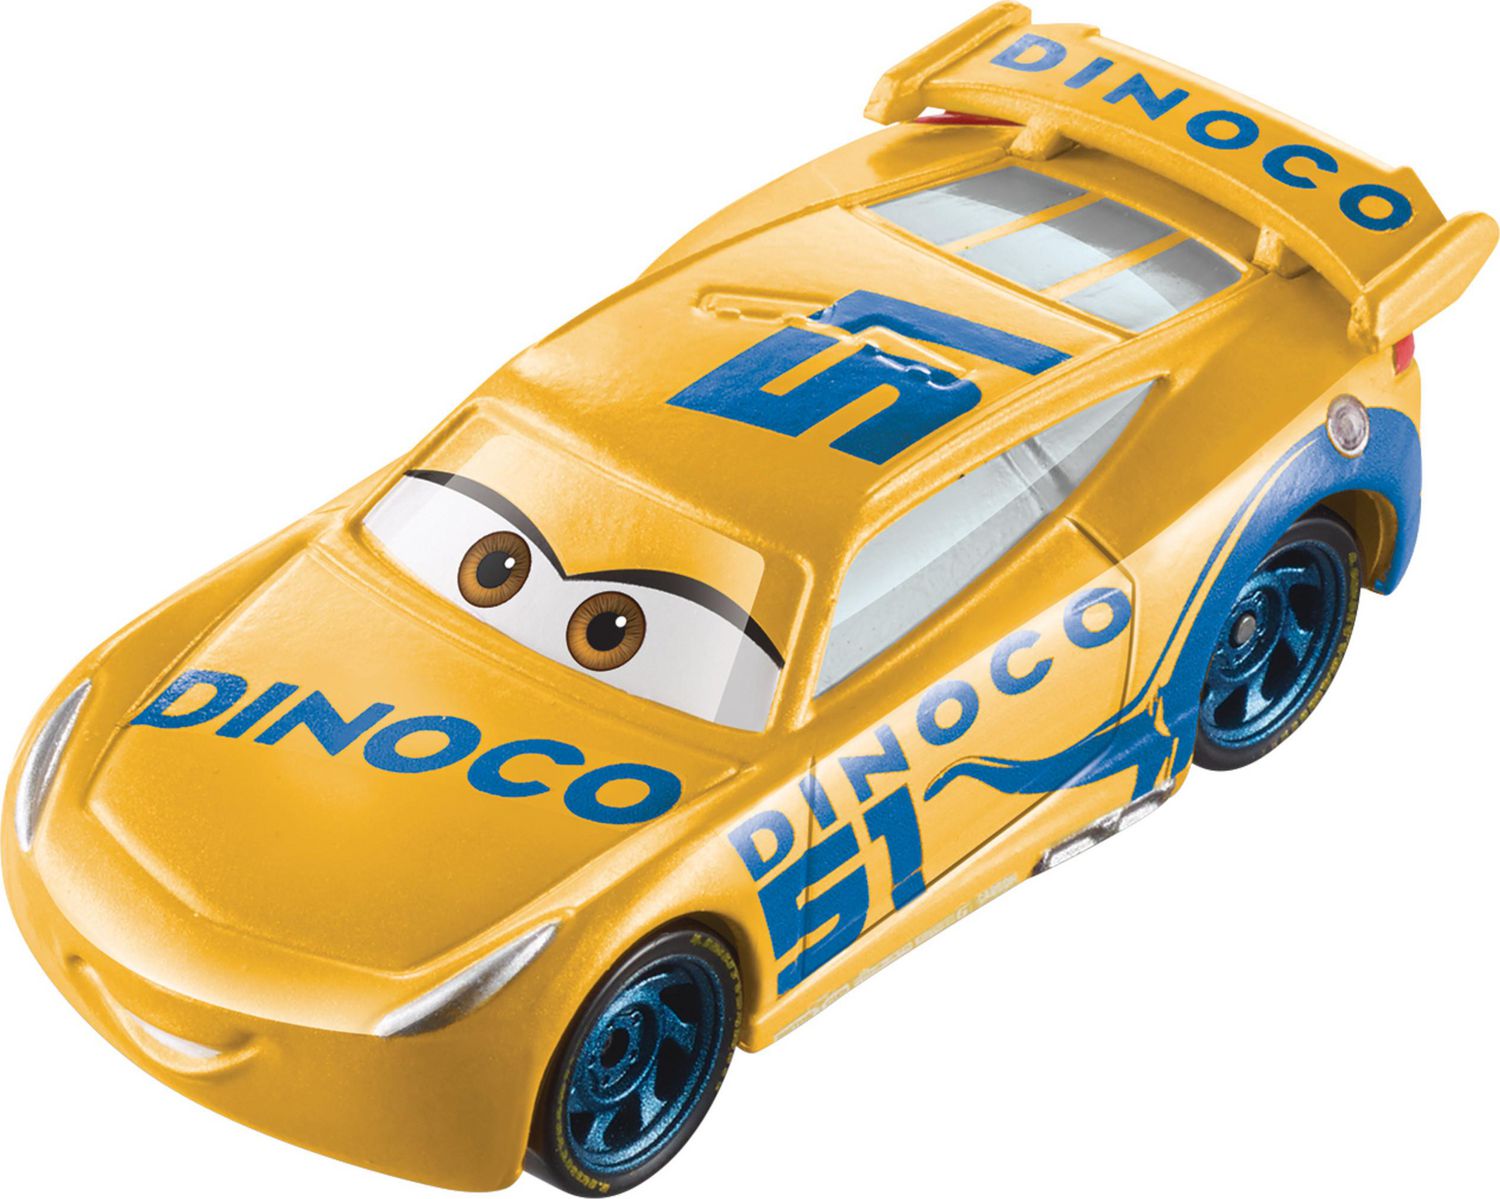 Cars 3 Road To The Races Tour Brings Life-Sized Lightning McQueen, Cruz  Ramirez & Jackson Storm to a City Near You [UPDATED] - Pixar Post